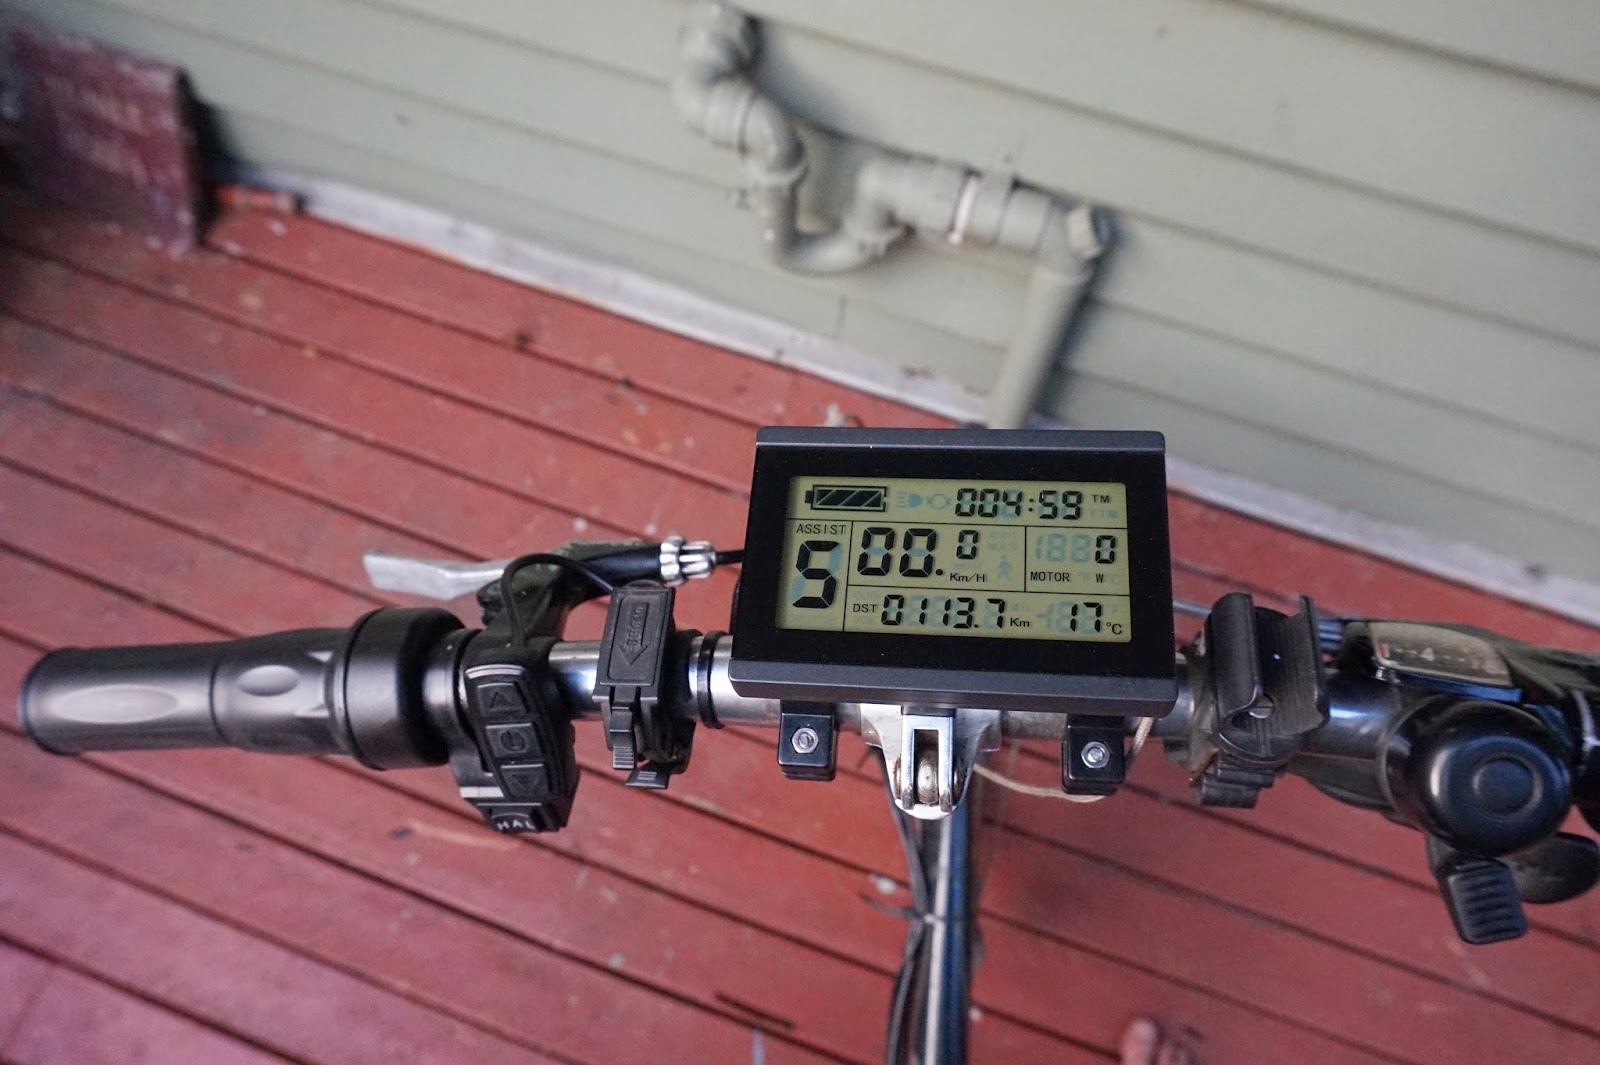 Bruce Teakle's Pages: Xiongda 2-speed hub motor Review – First impressions